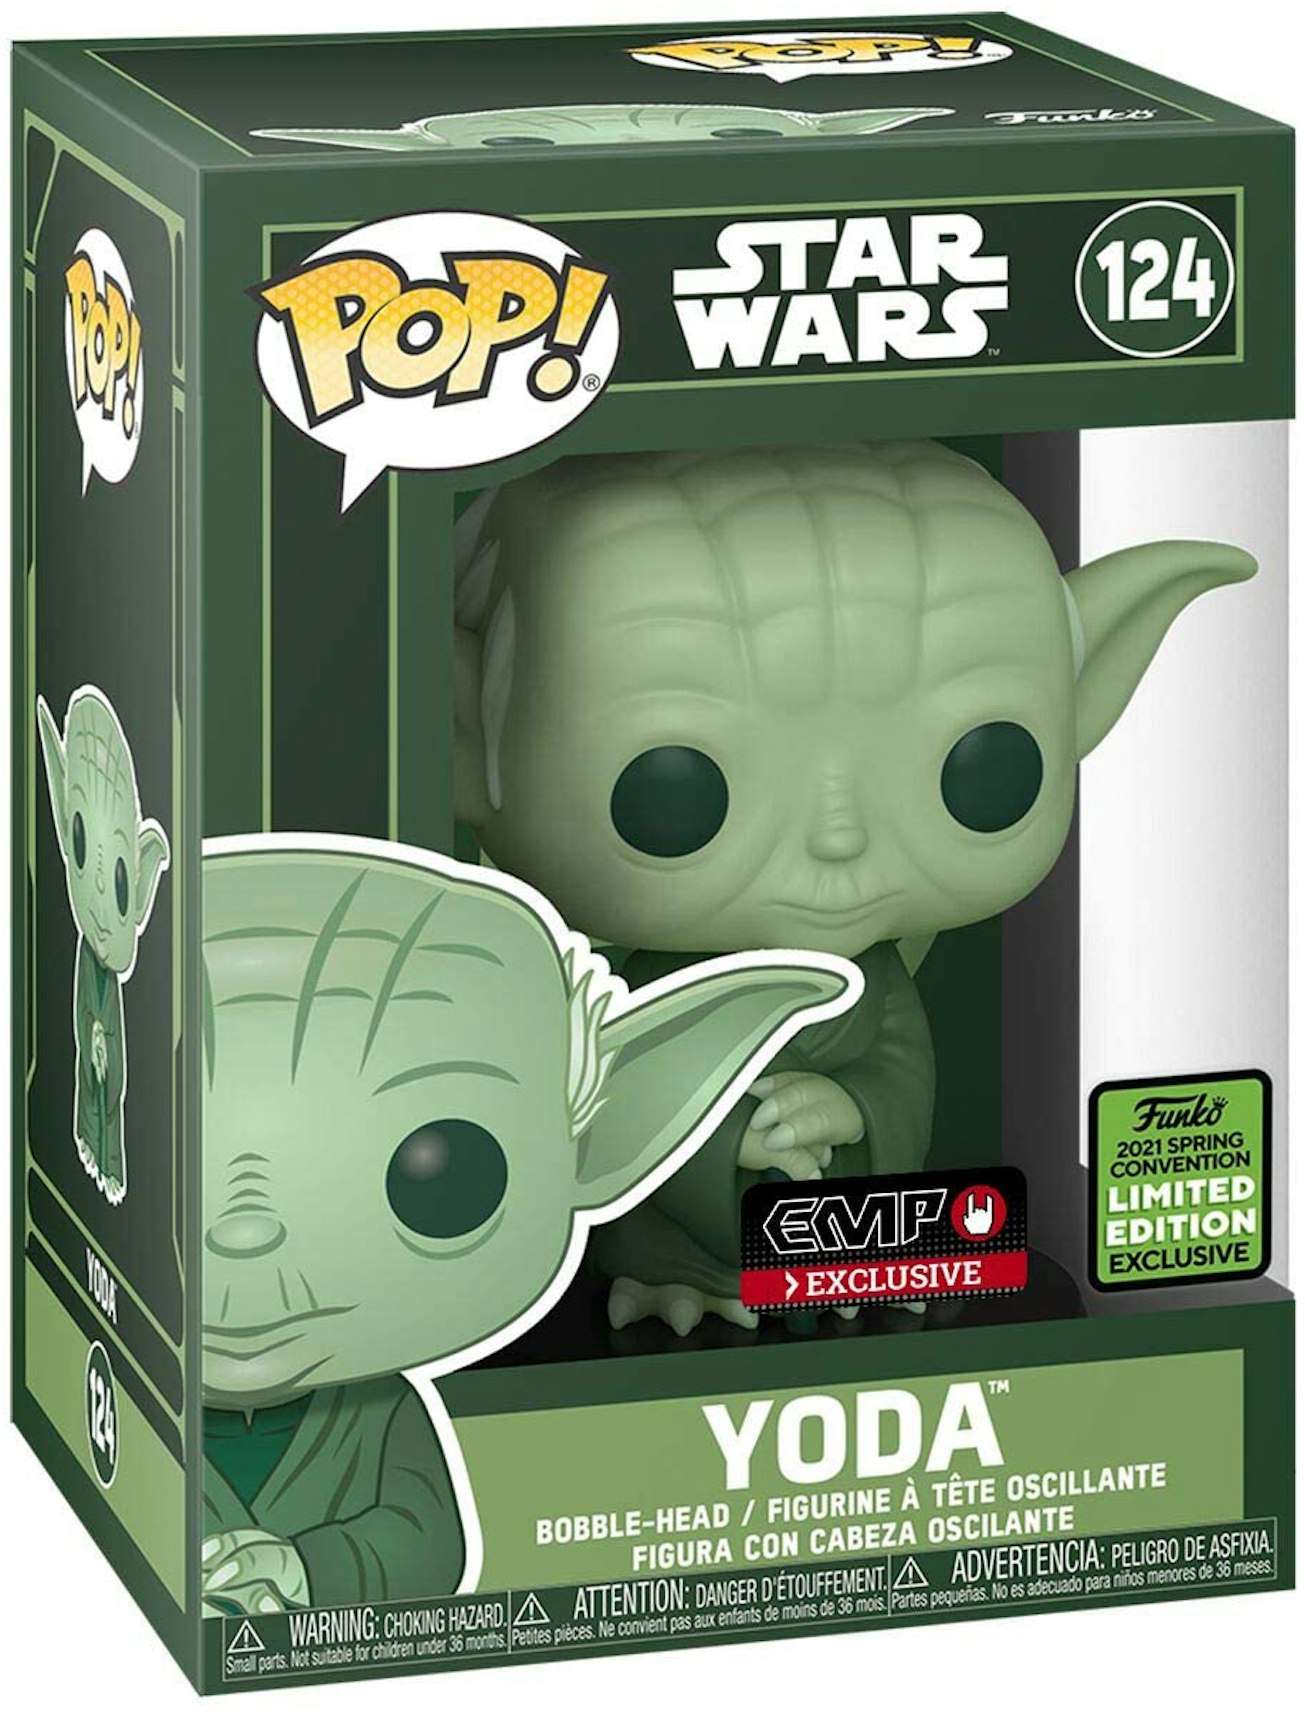 Funko Pop! Star Wars Yoda Bobble-Head EMP Spring Convention Limited Exclusive Figure #124 - - JP